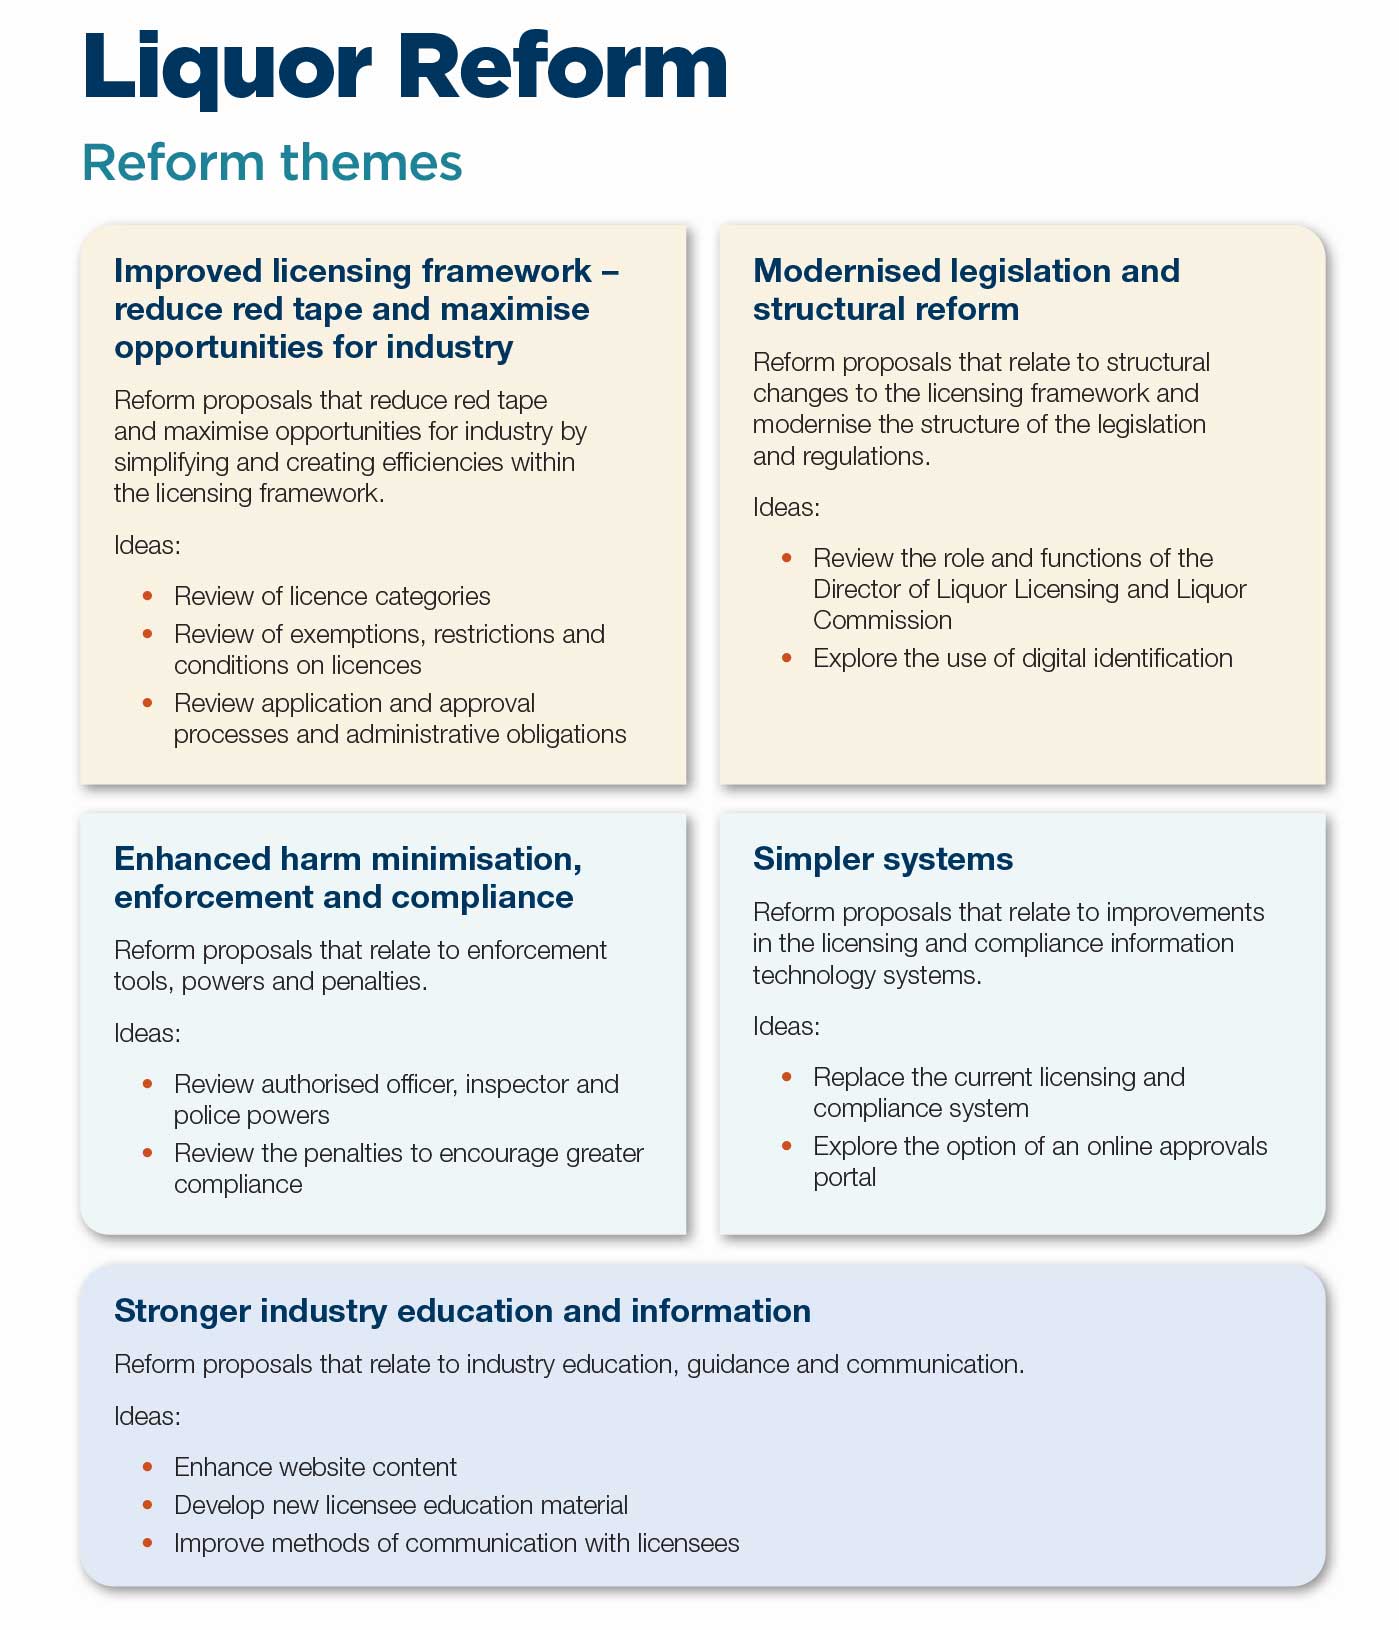 Liquor Reform one page overview with the information about all the themes mentioned above.